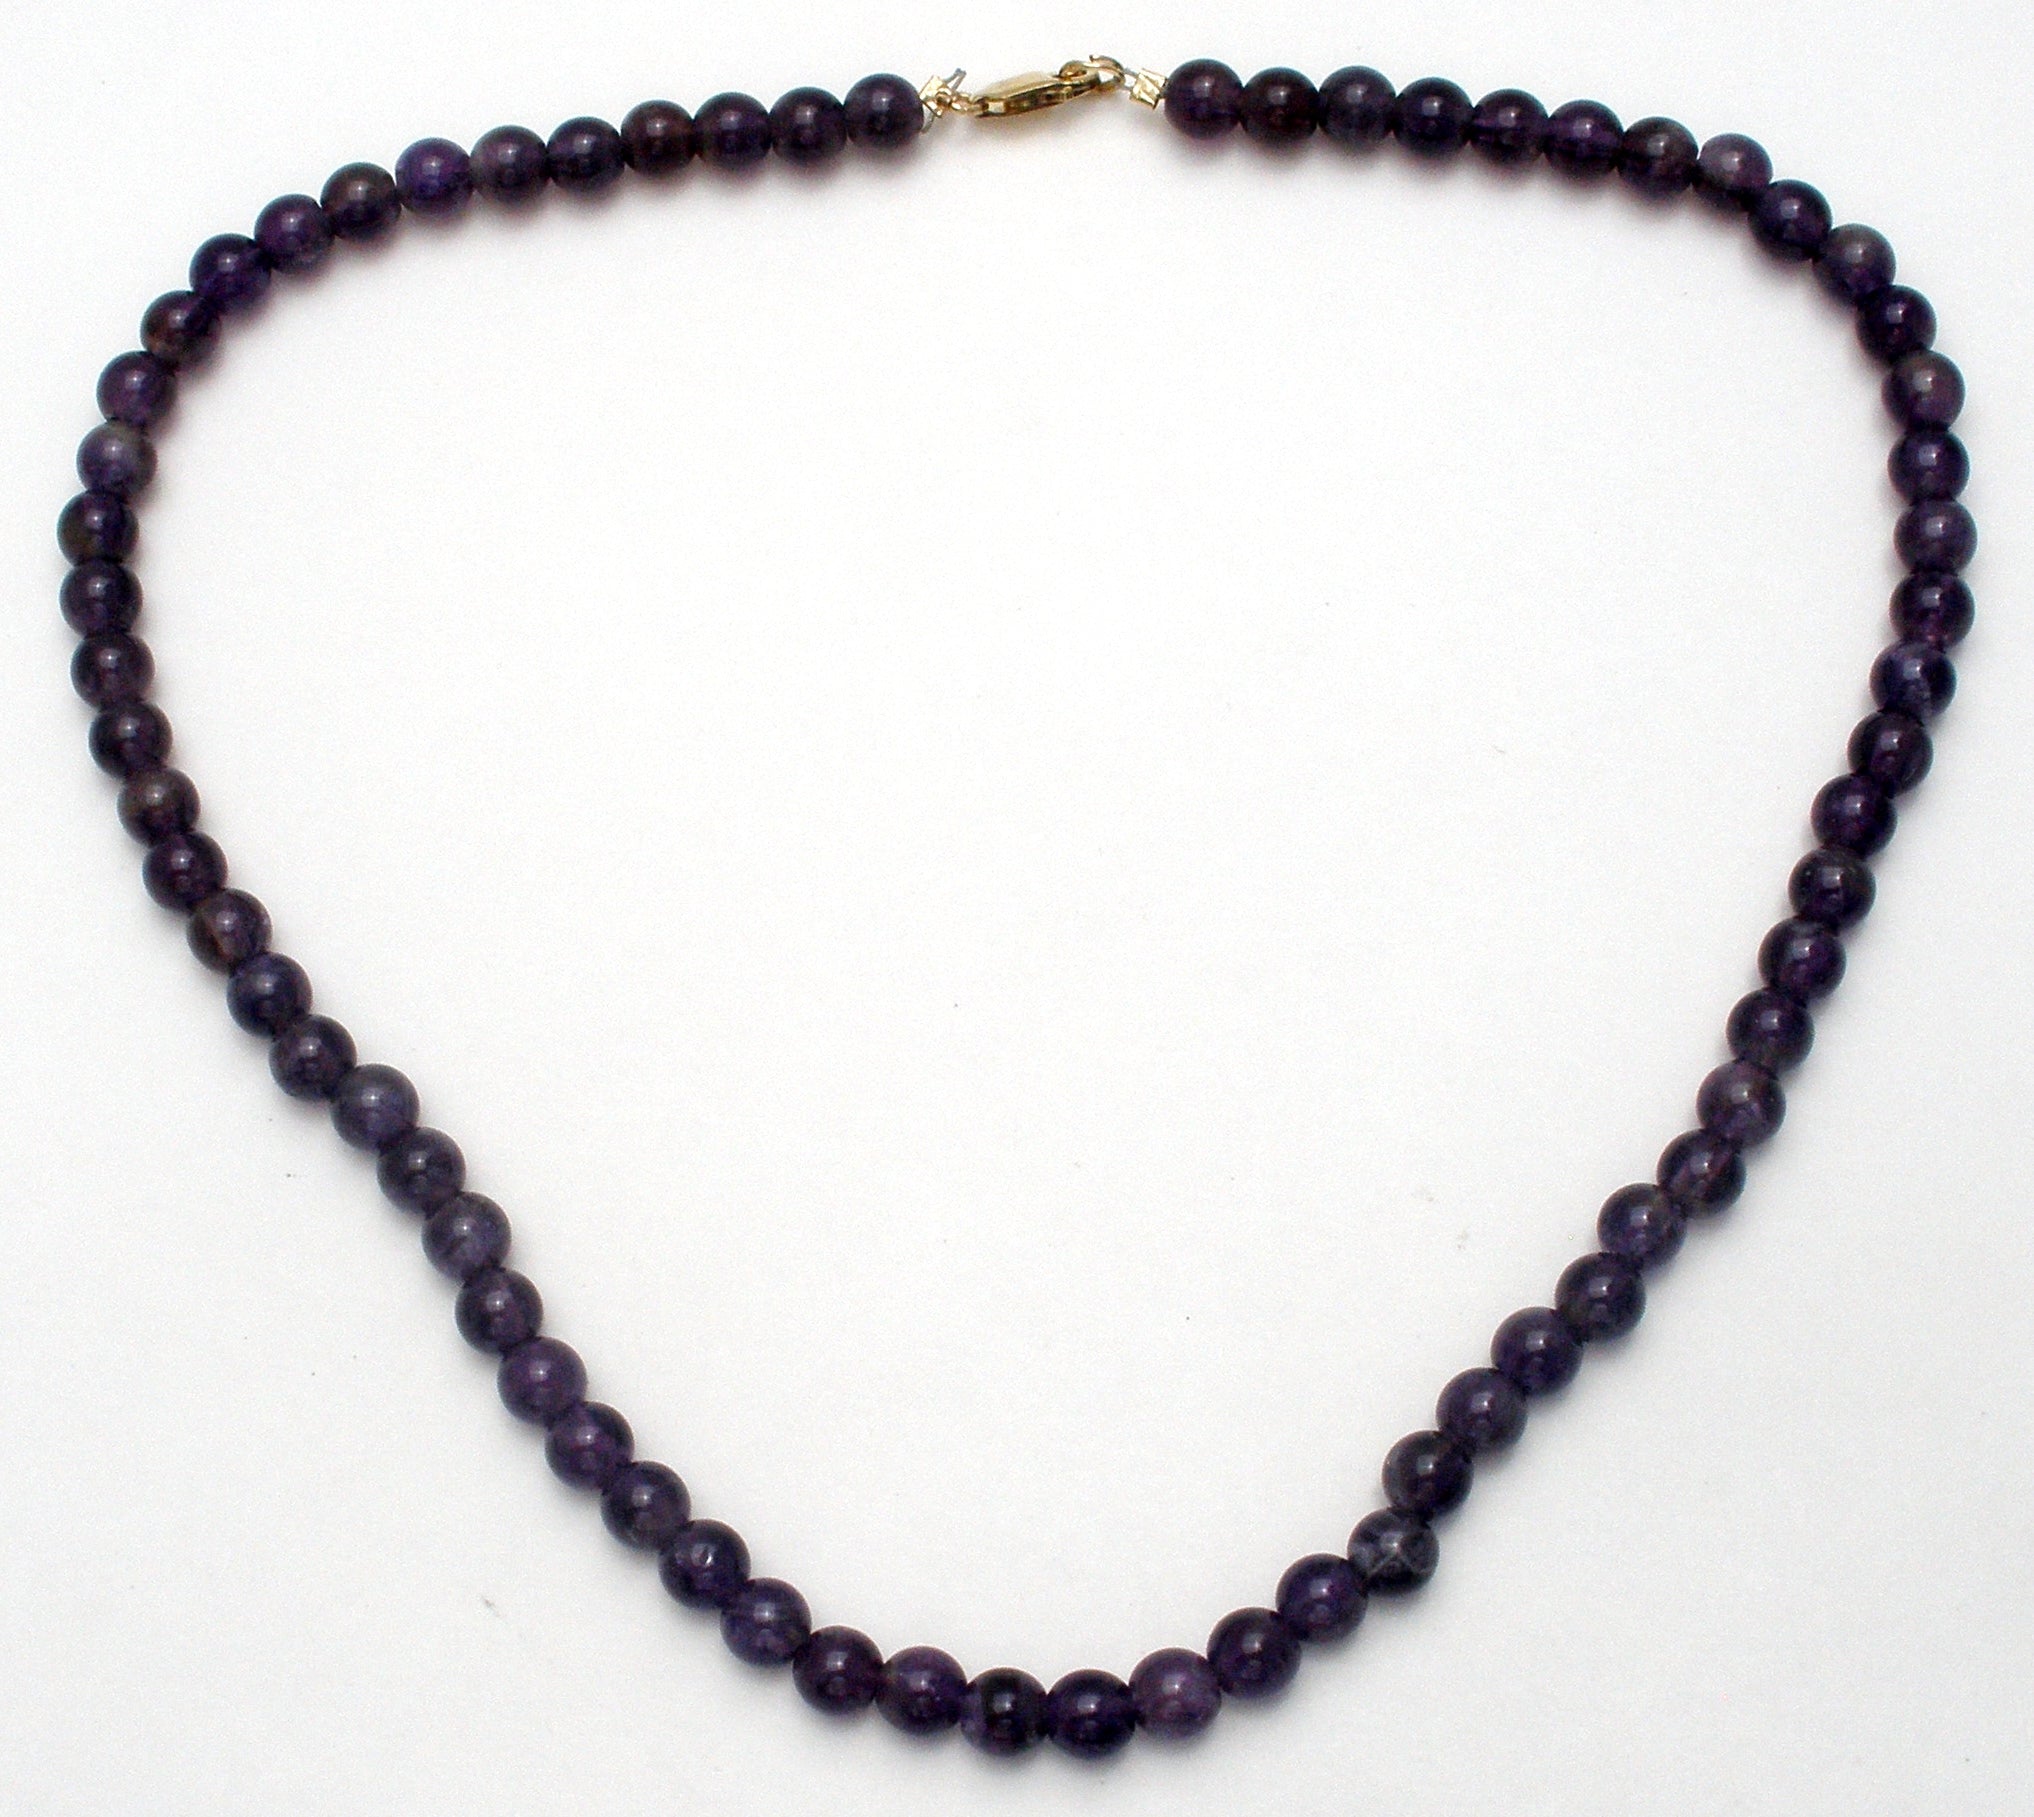 A 47.5” Genuine 6 MM Amethyst Bead Necklace – Exeter Jewelers